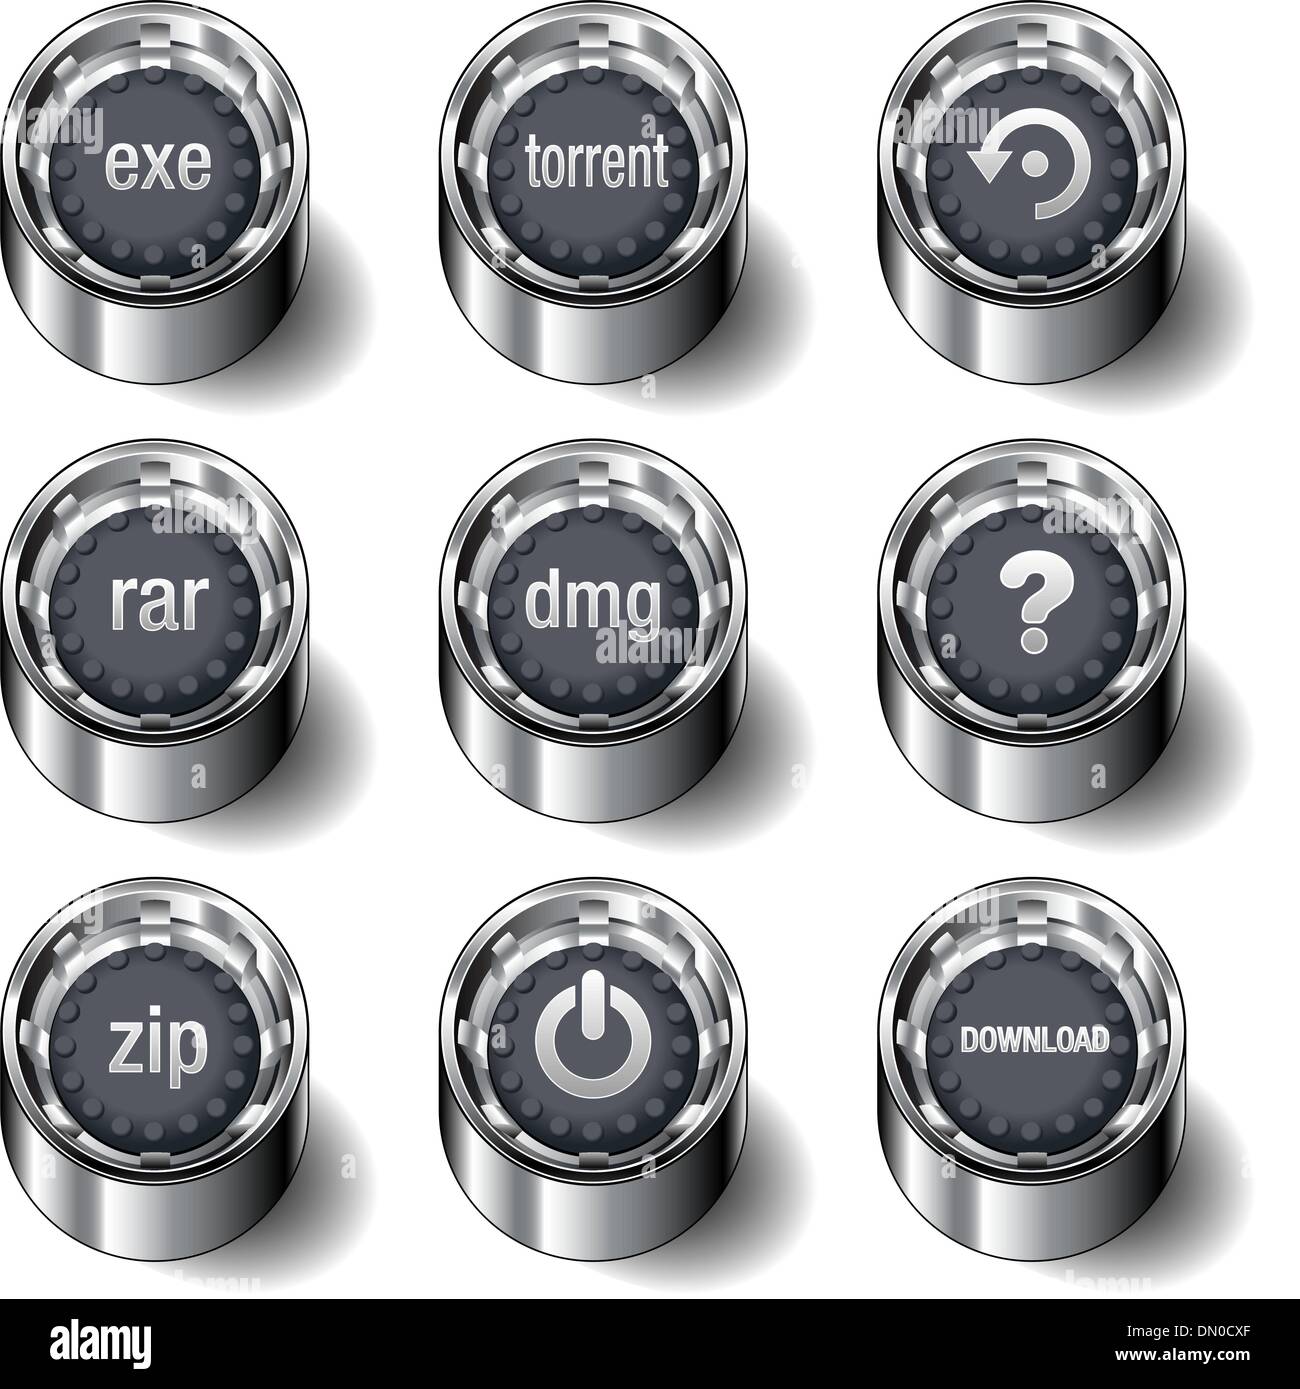 Internet download file types rubber button set Stock Vector